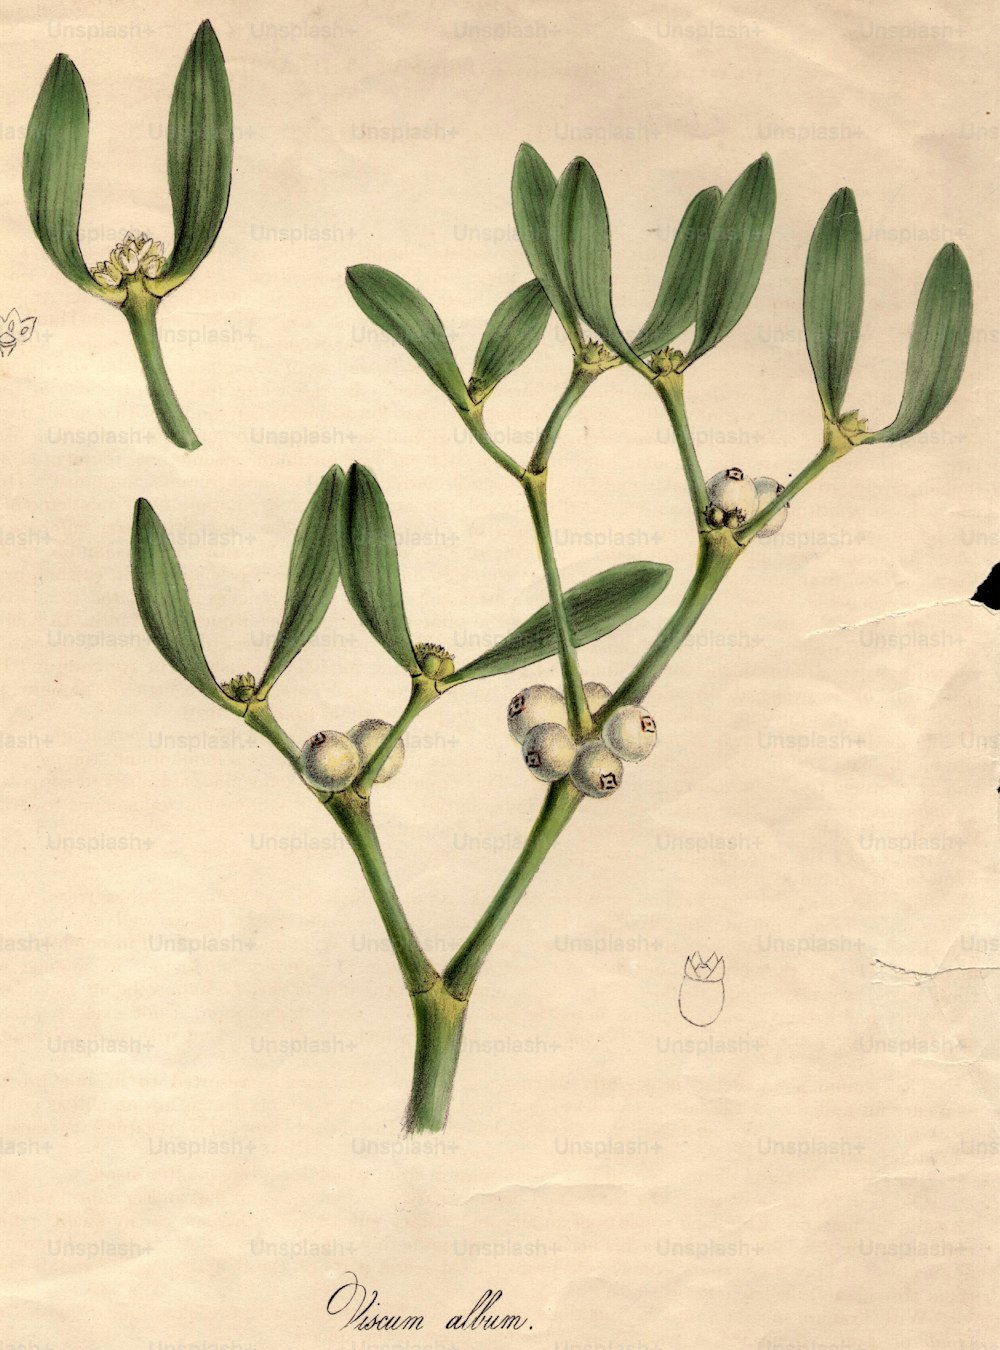 circa 1800:  Viscum album, or mistletoe, with white berries.  (Photo by Hulton Archive/Getty Images)